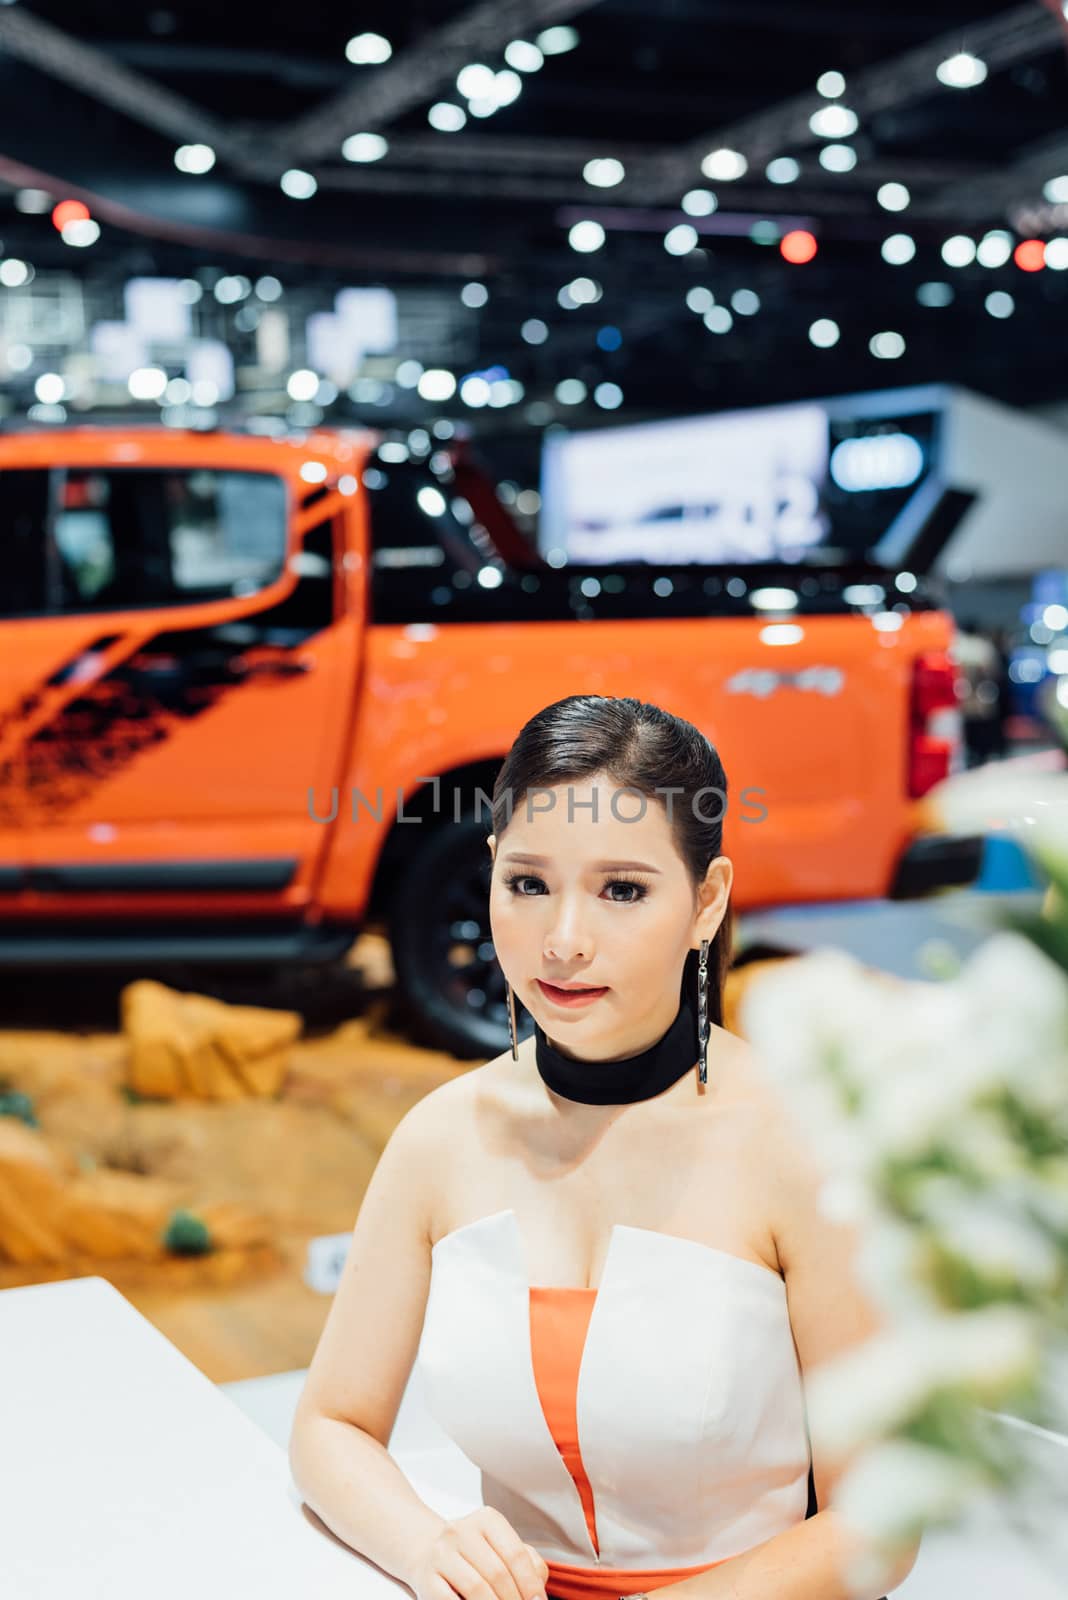 Pretty lady beauty and sexy in car show event by PongMoji